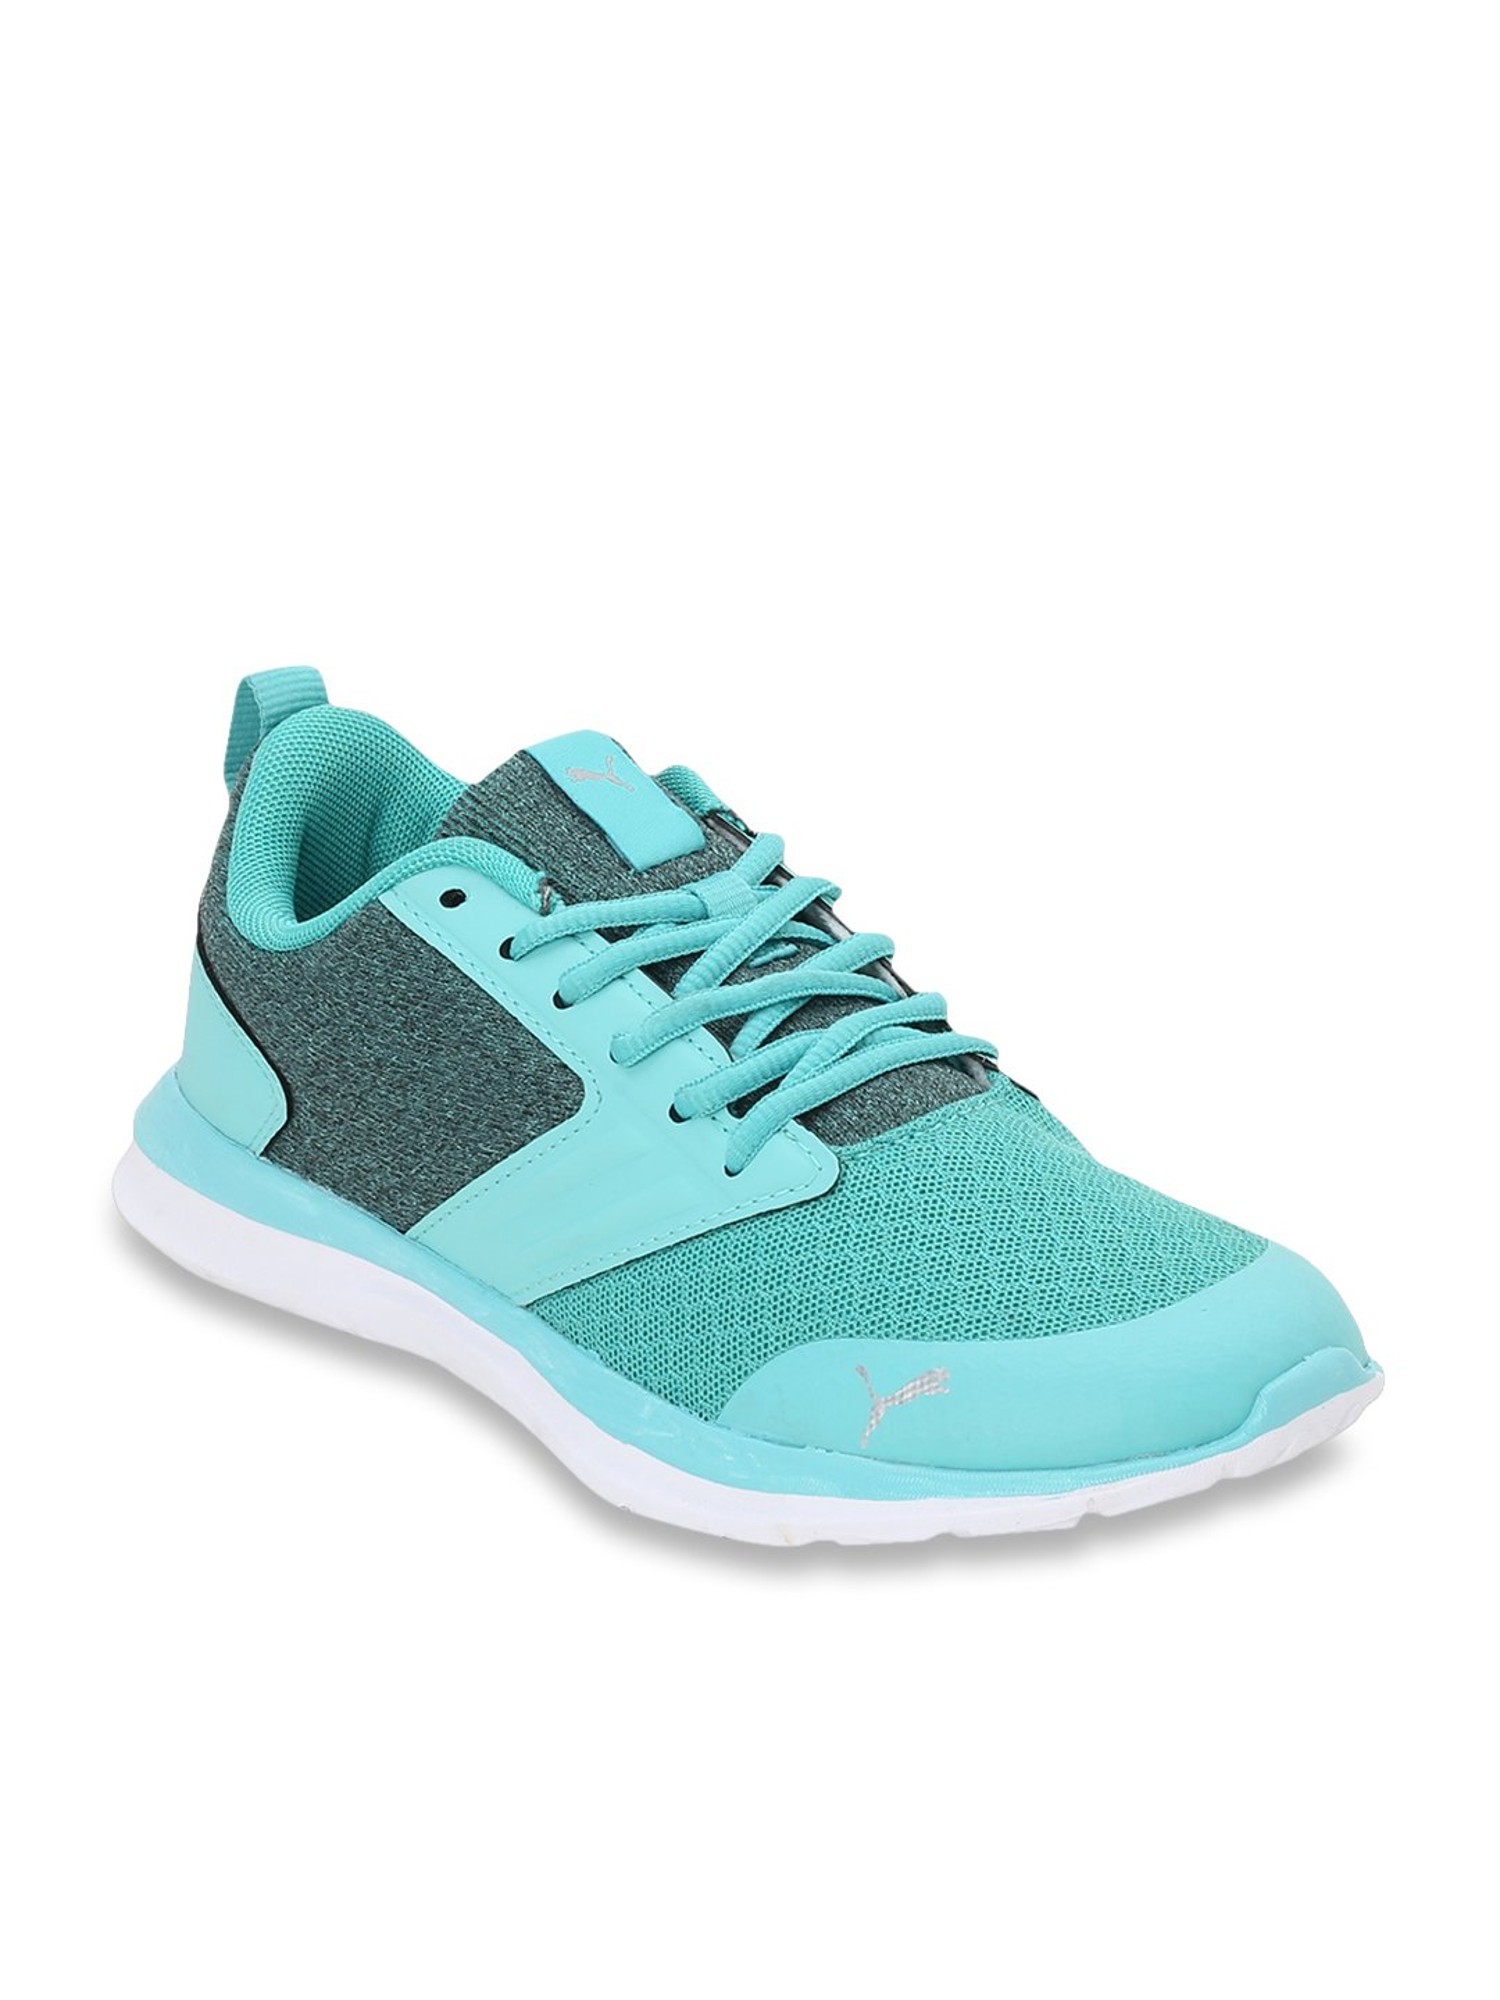 Agile T1 NM IDP Turquoise Running Shoes 